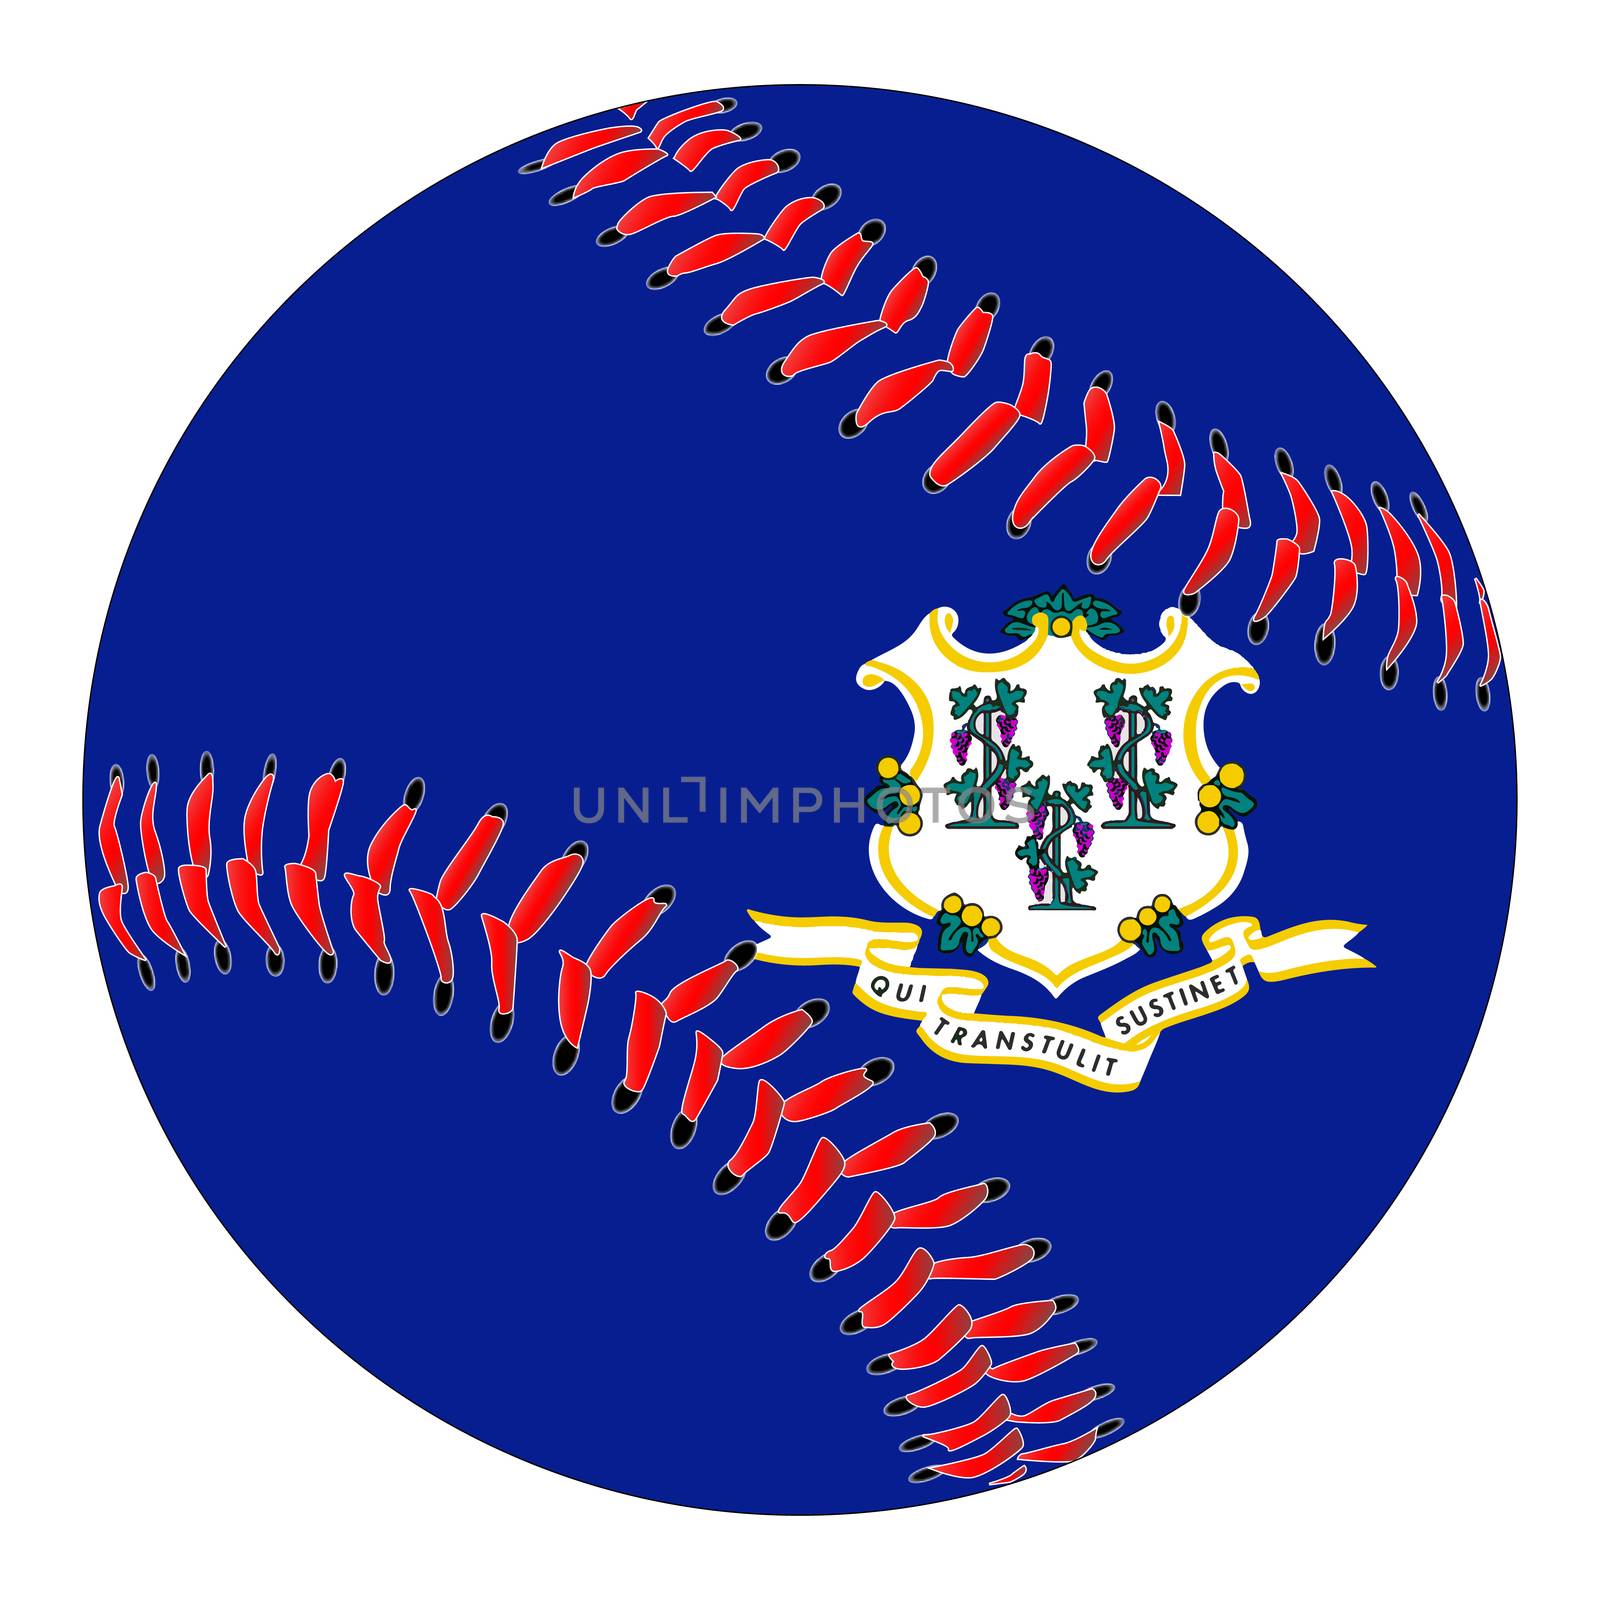 A new white baseball with red stitching with the Connecticut state flag overlay isolated on white